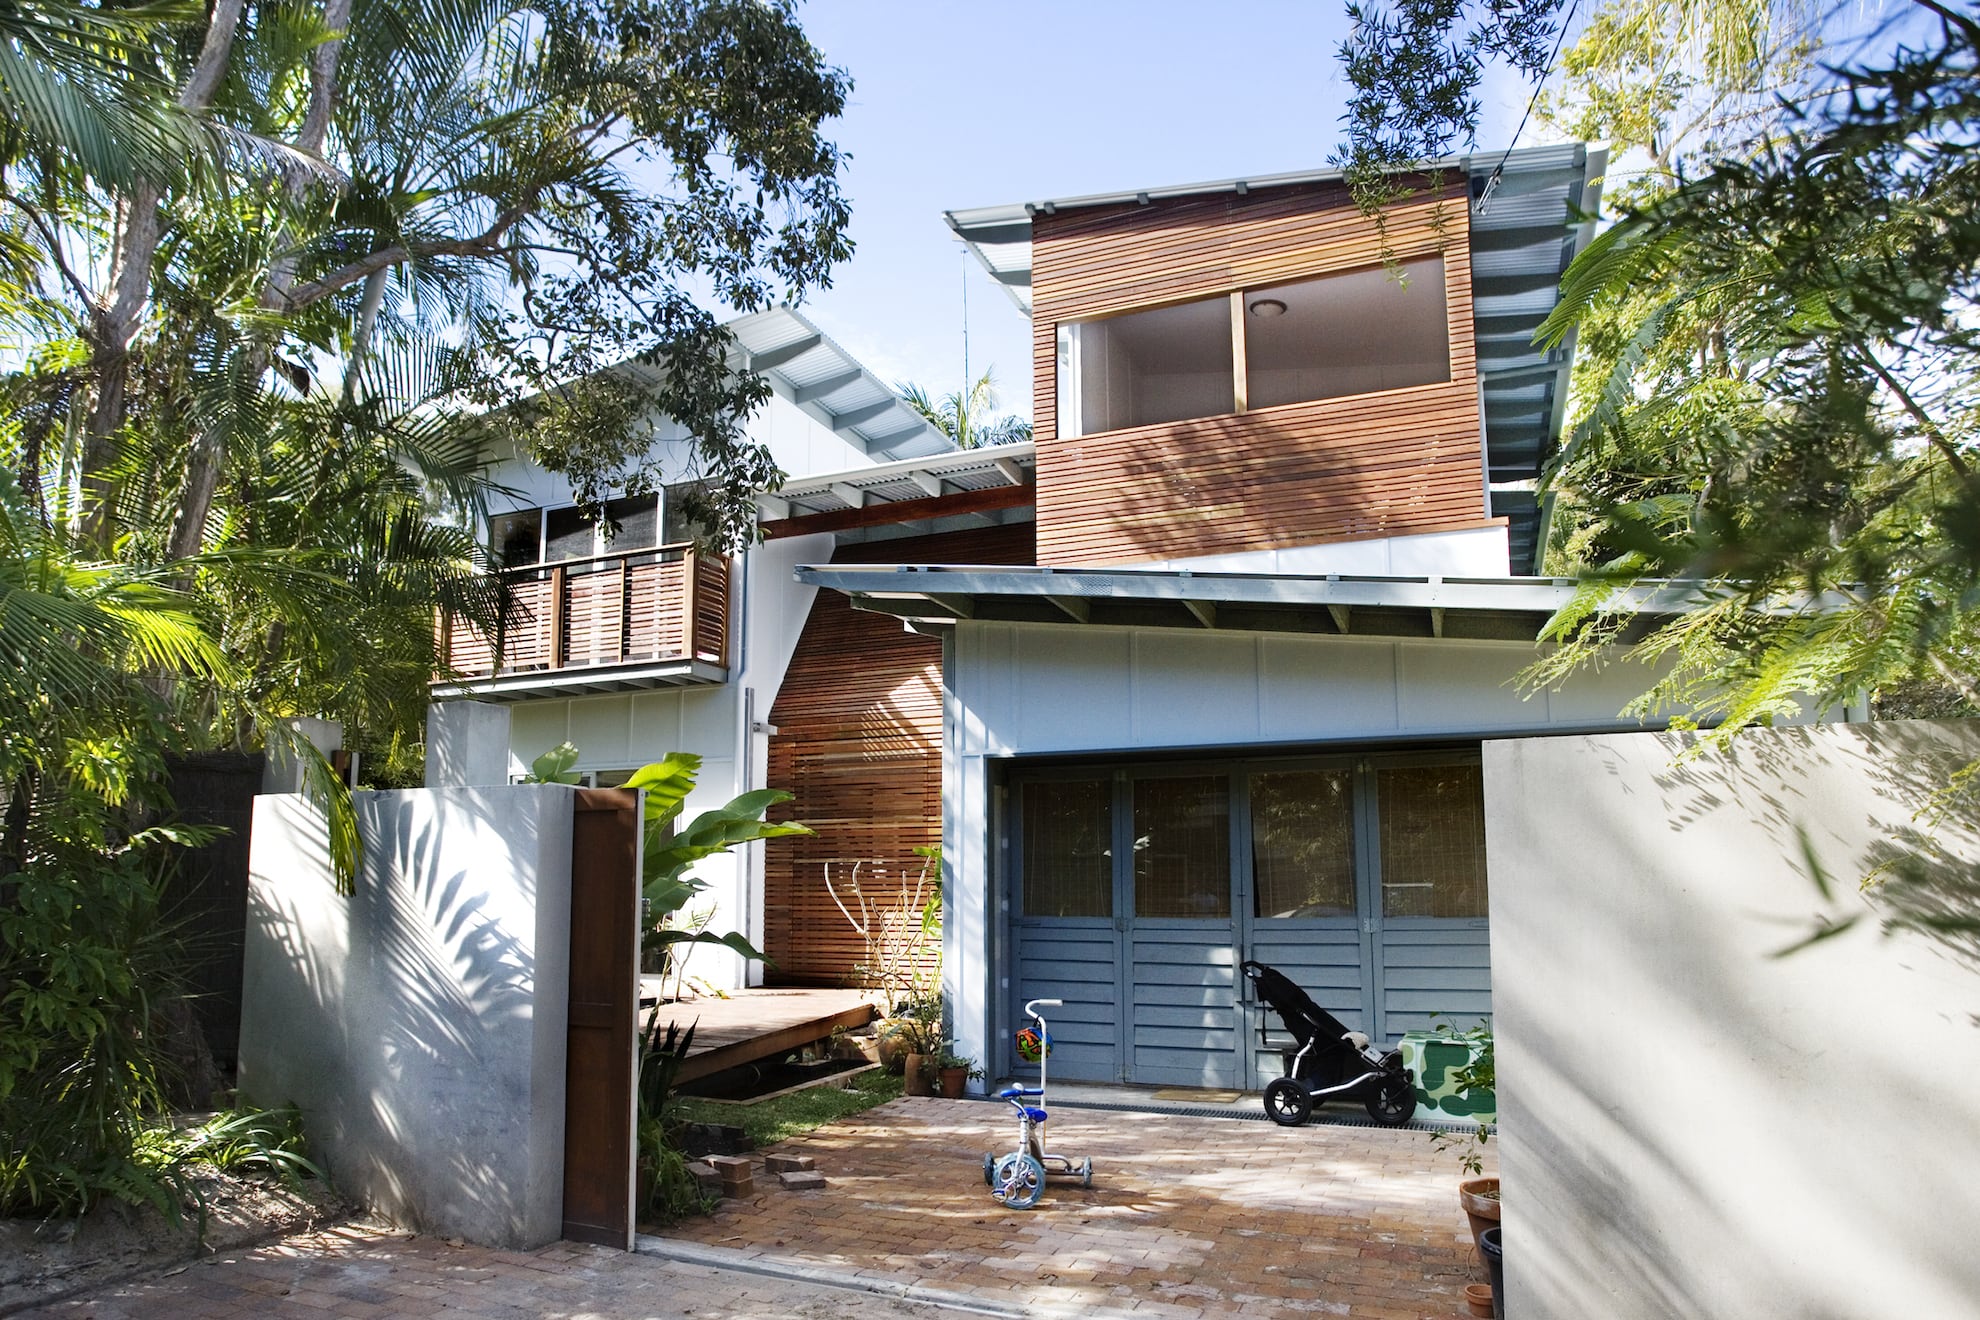 Depper Street project by mdesign, a building design practice that operates on the Sunshine Coast.